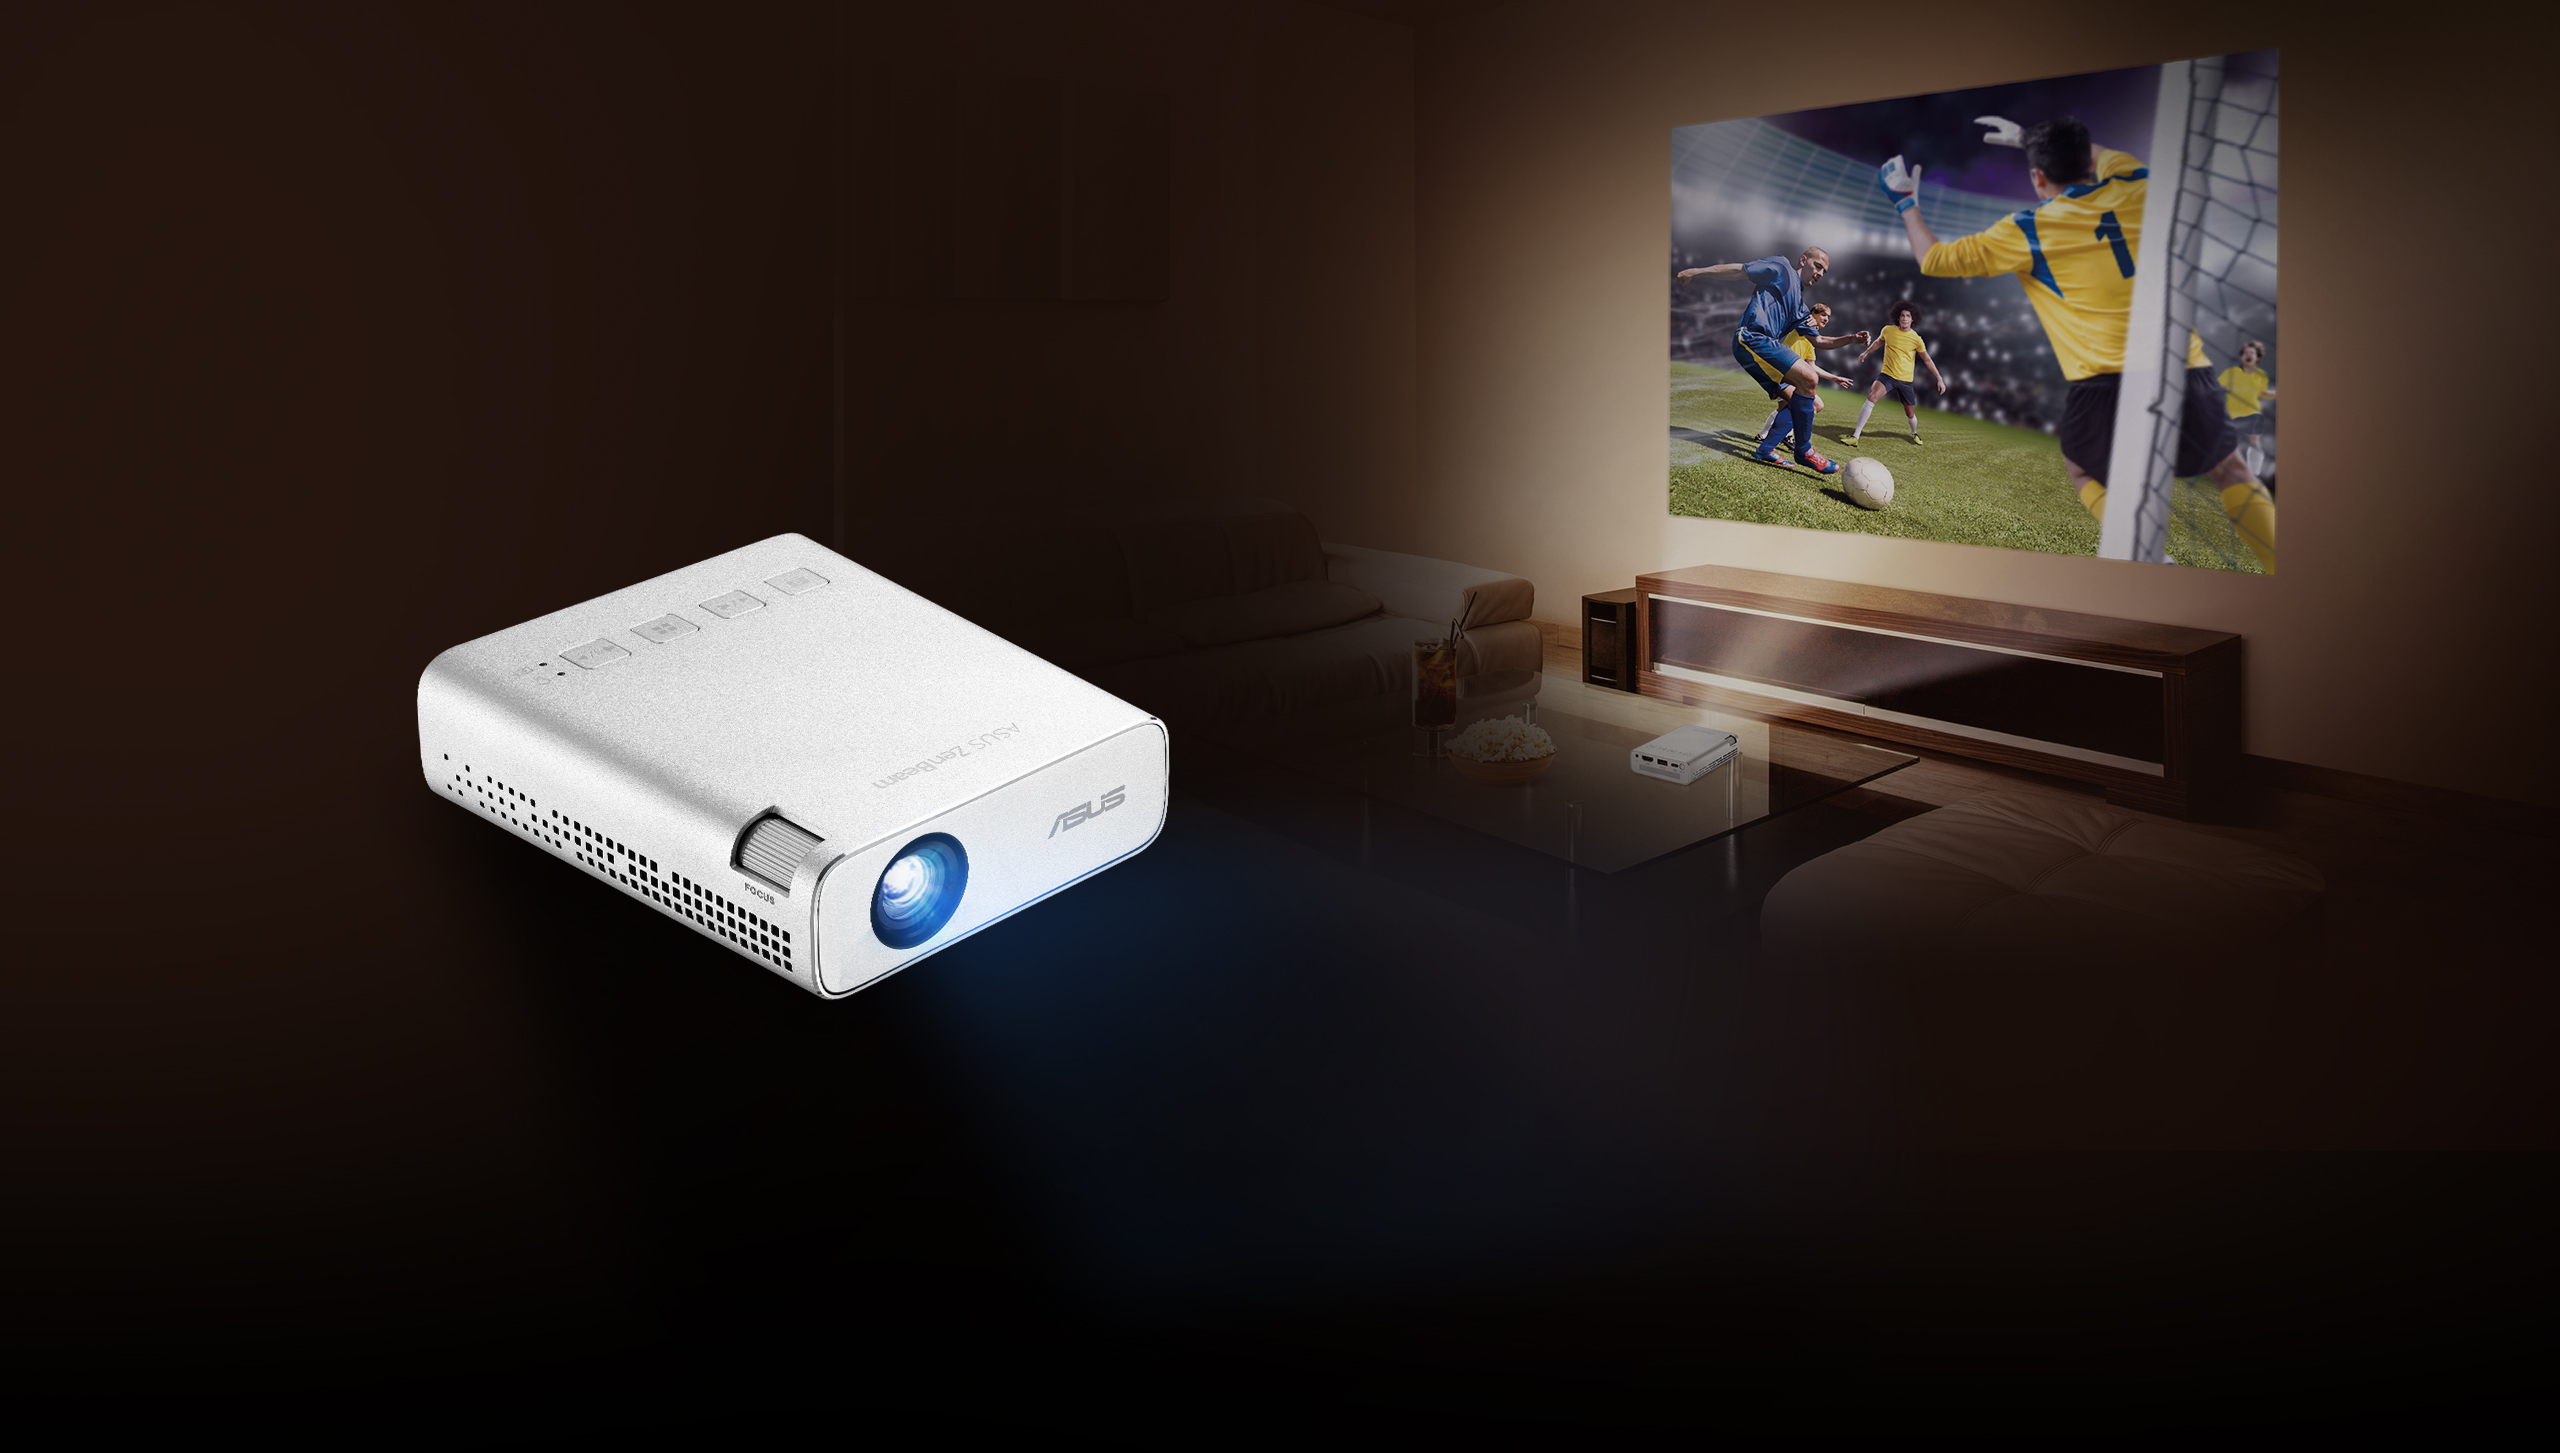 ASUS ZenBeam E1R is compact wireless mini projector with Auto Portrait mode for vertical social media content mirroring